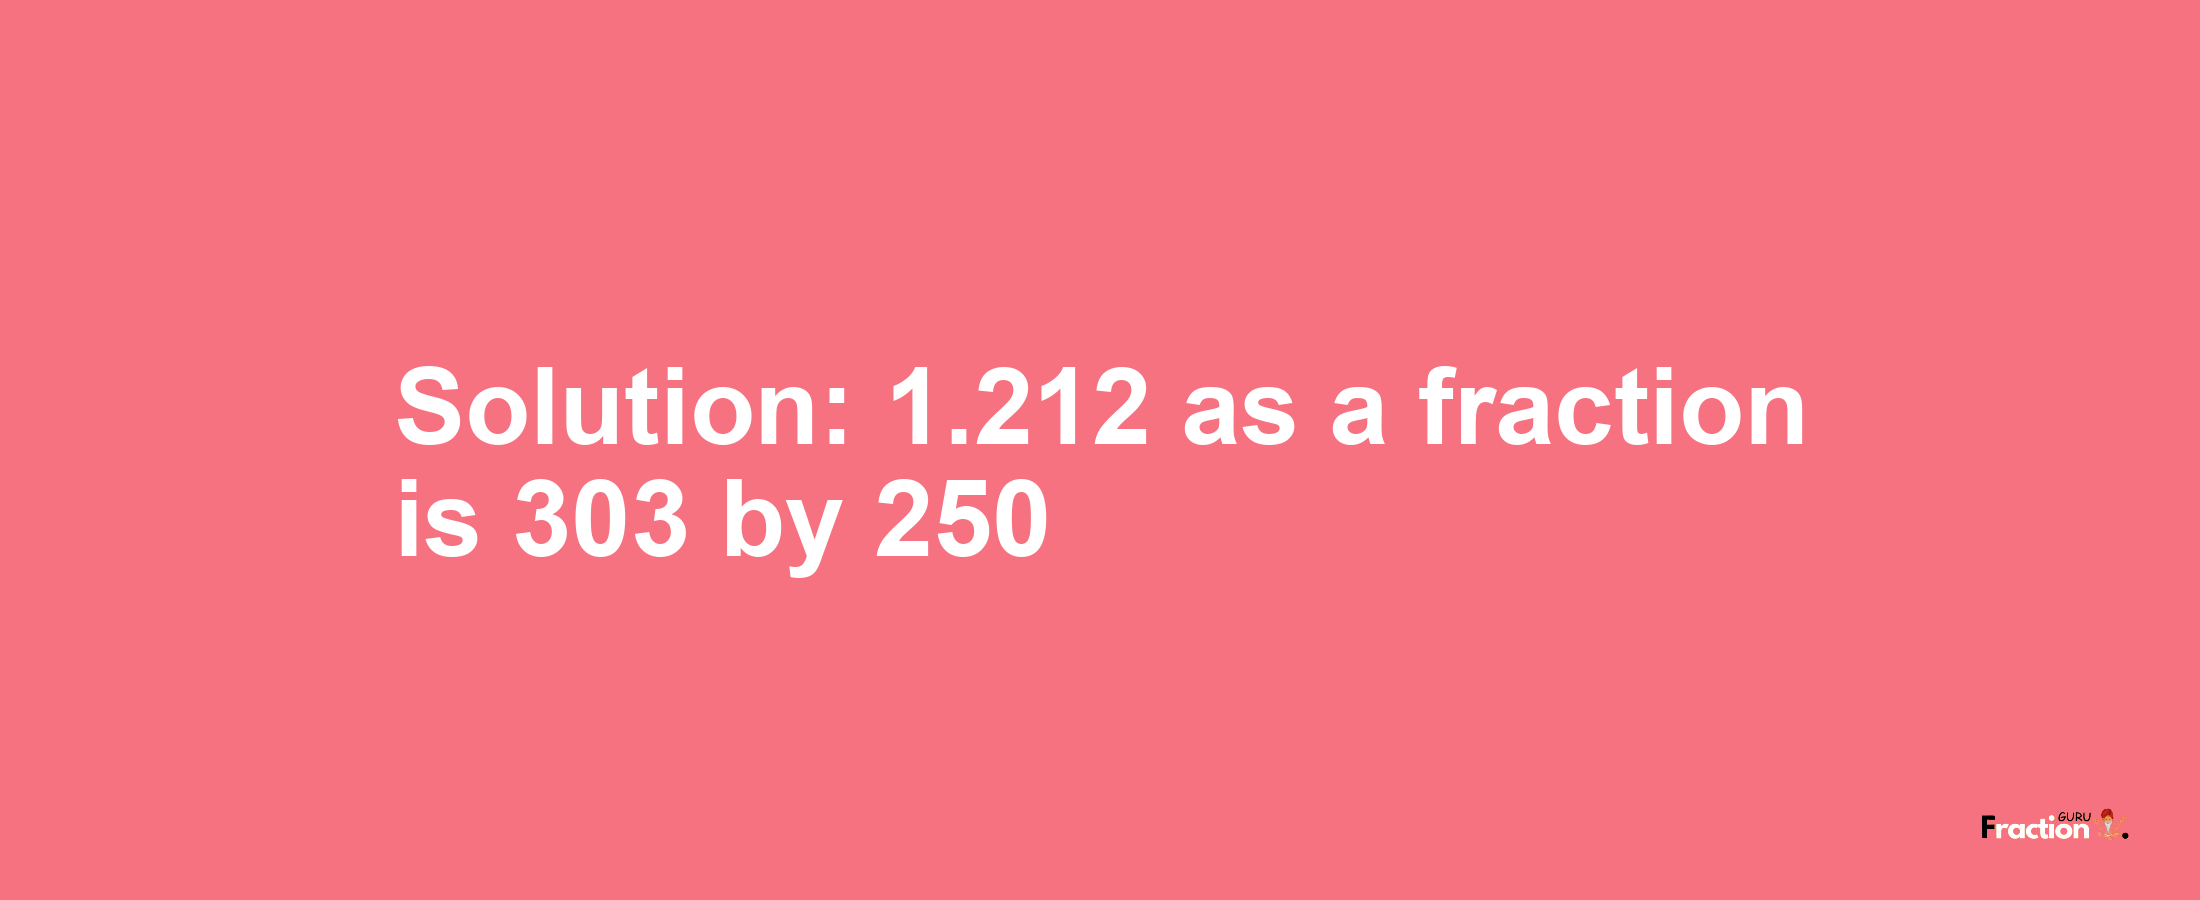 Solution:1.212 as a fraction is 303/250